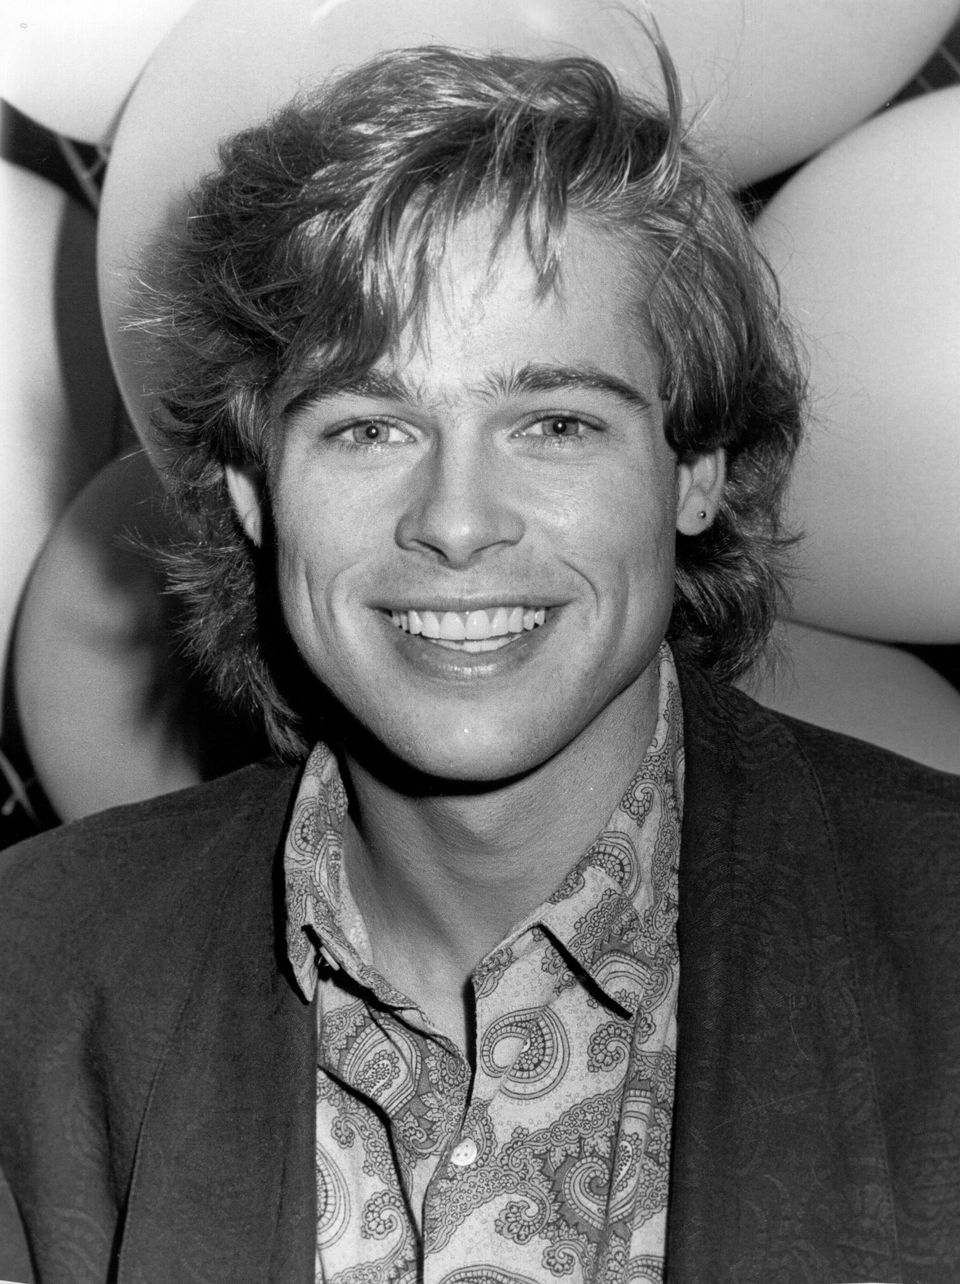 50 Pics That Prove Brad Pitt Is Getting Better With Age